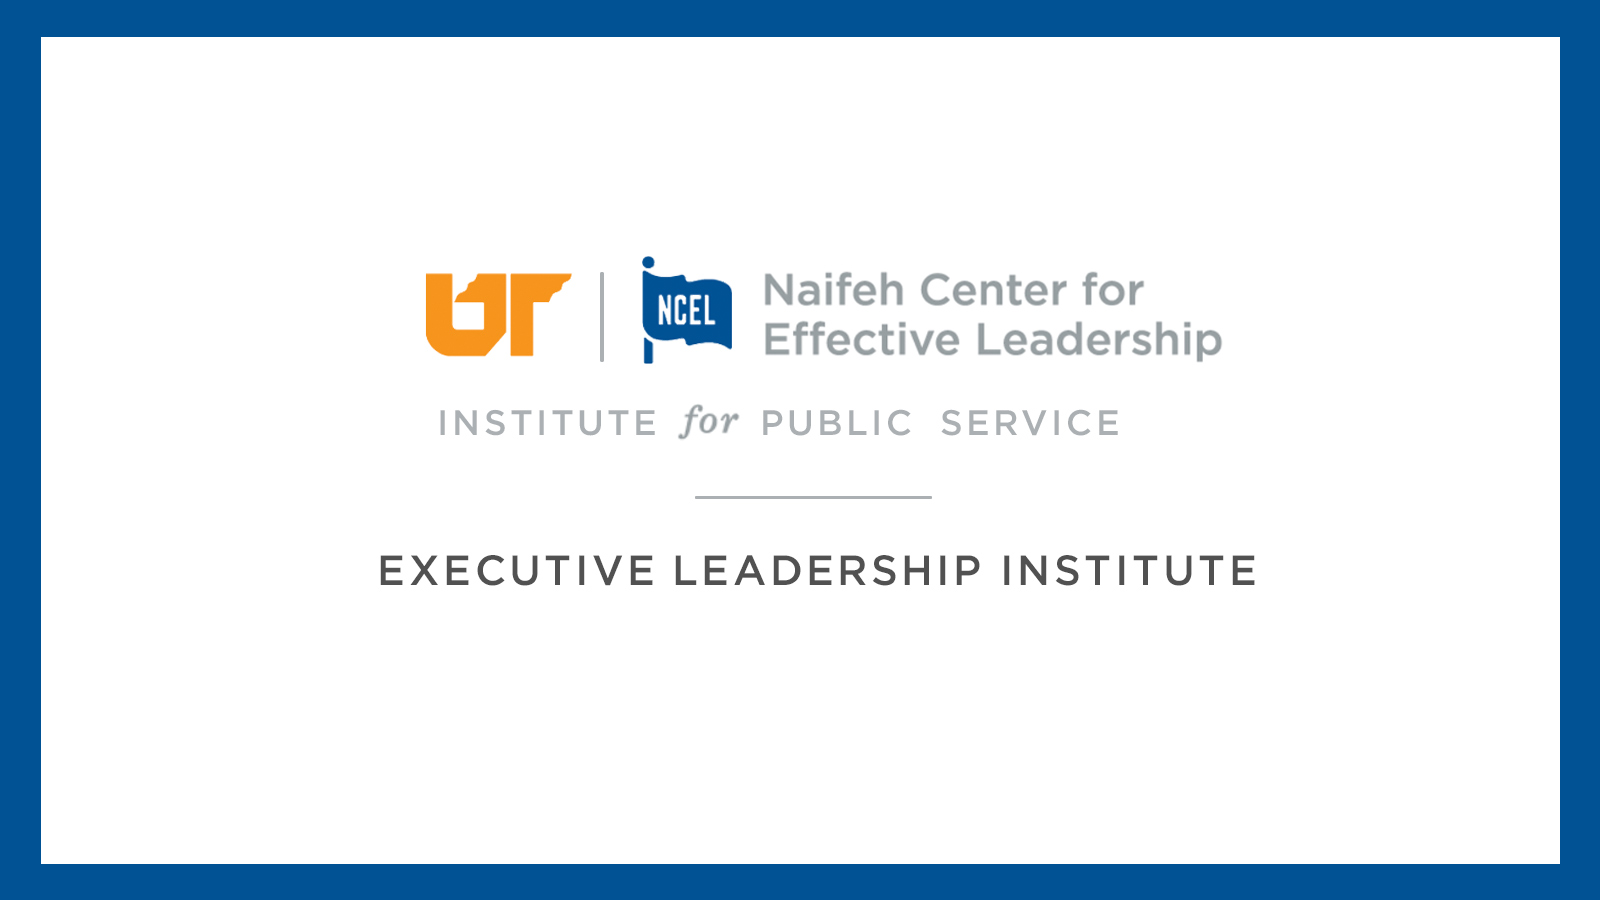 Naifeh Center for Effective Leadership, Institute for Public Service, Executive Leadership Institute